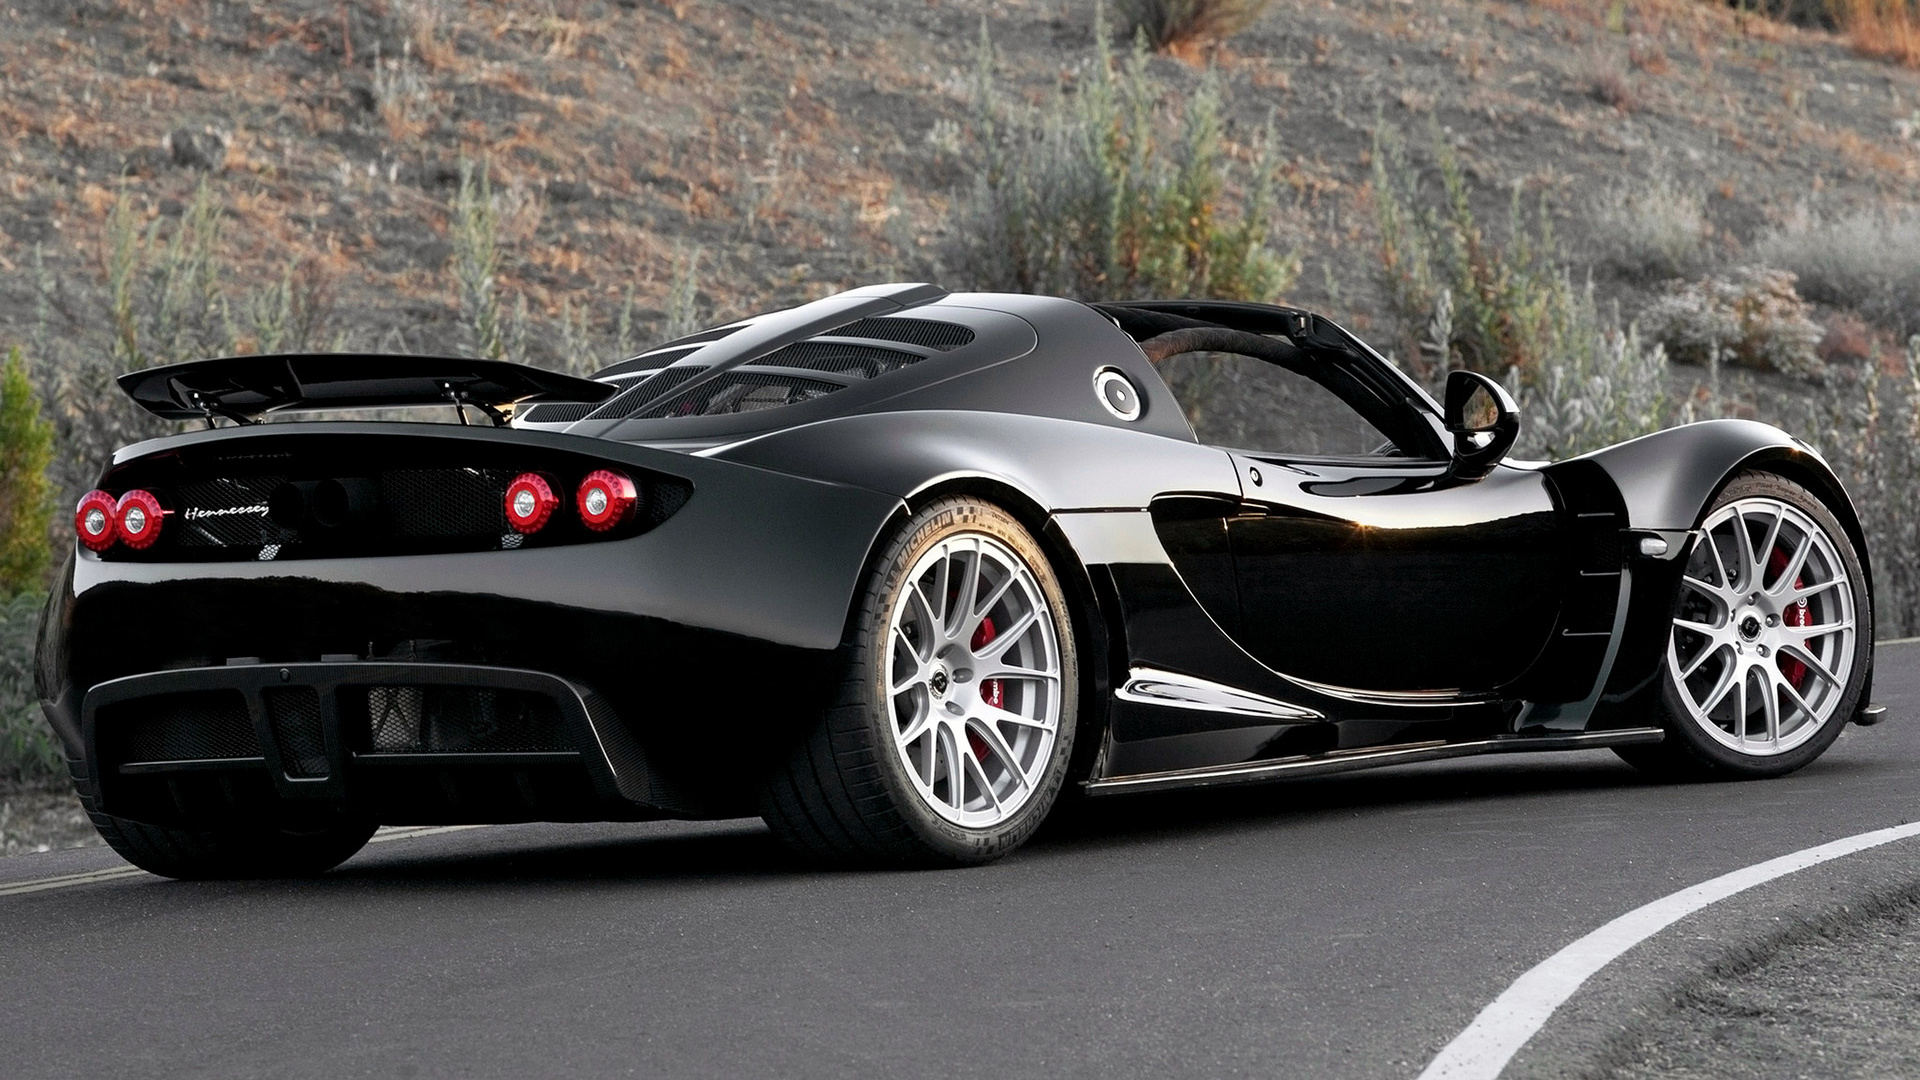 Hennessey Venom GT Spyder Wallpapers and HD Images